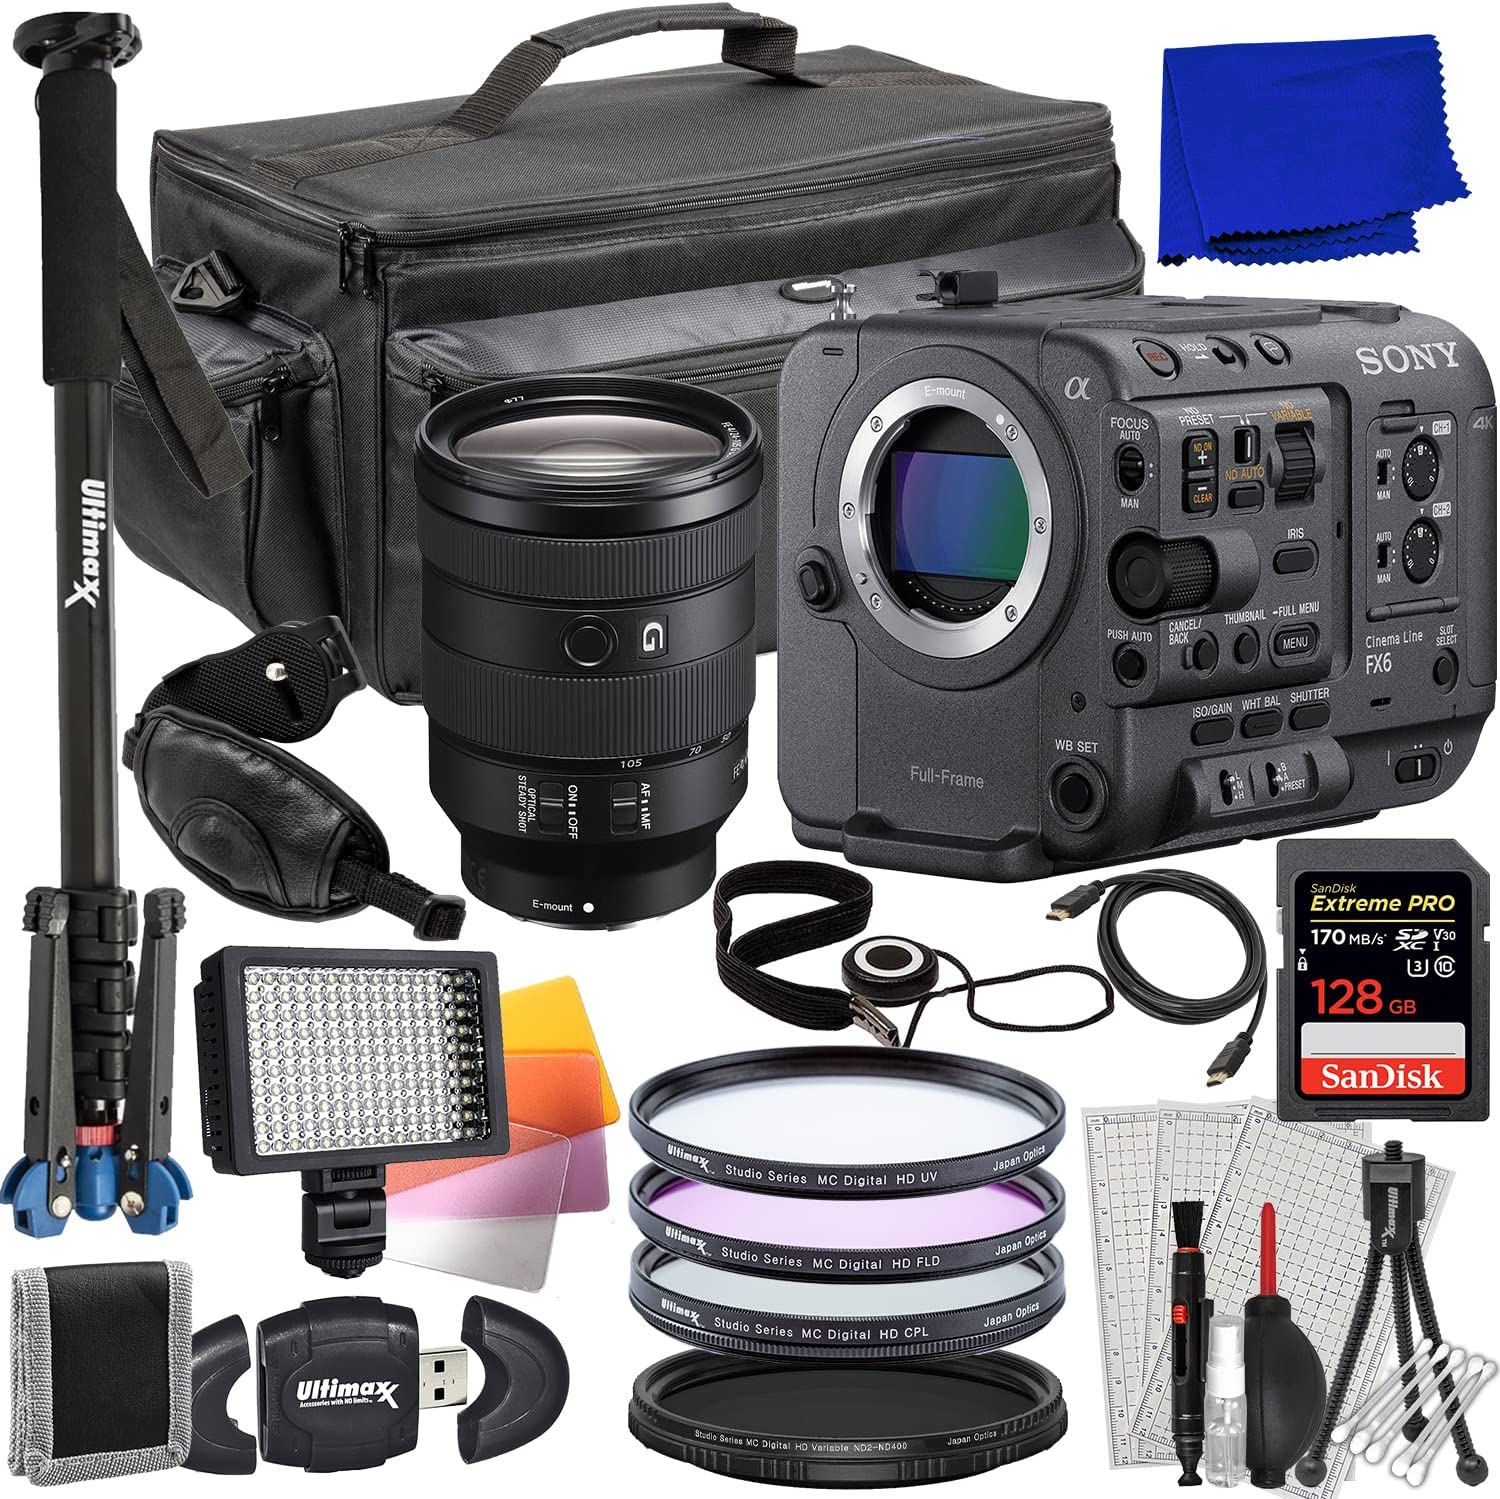 Sony FX6 Digital Cinema Camera Kit with 24-105mm Lens + SanDisk 128GB Extreme Pro Memory Card, 160 LED Video Light, Deluxe 62â? Monopod & Much More (35pc Bundle)